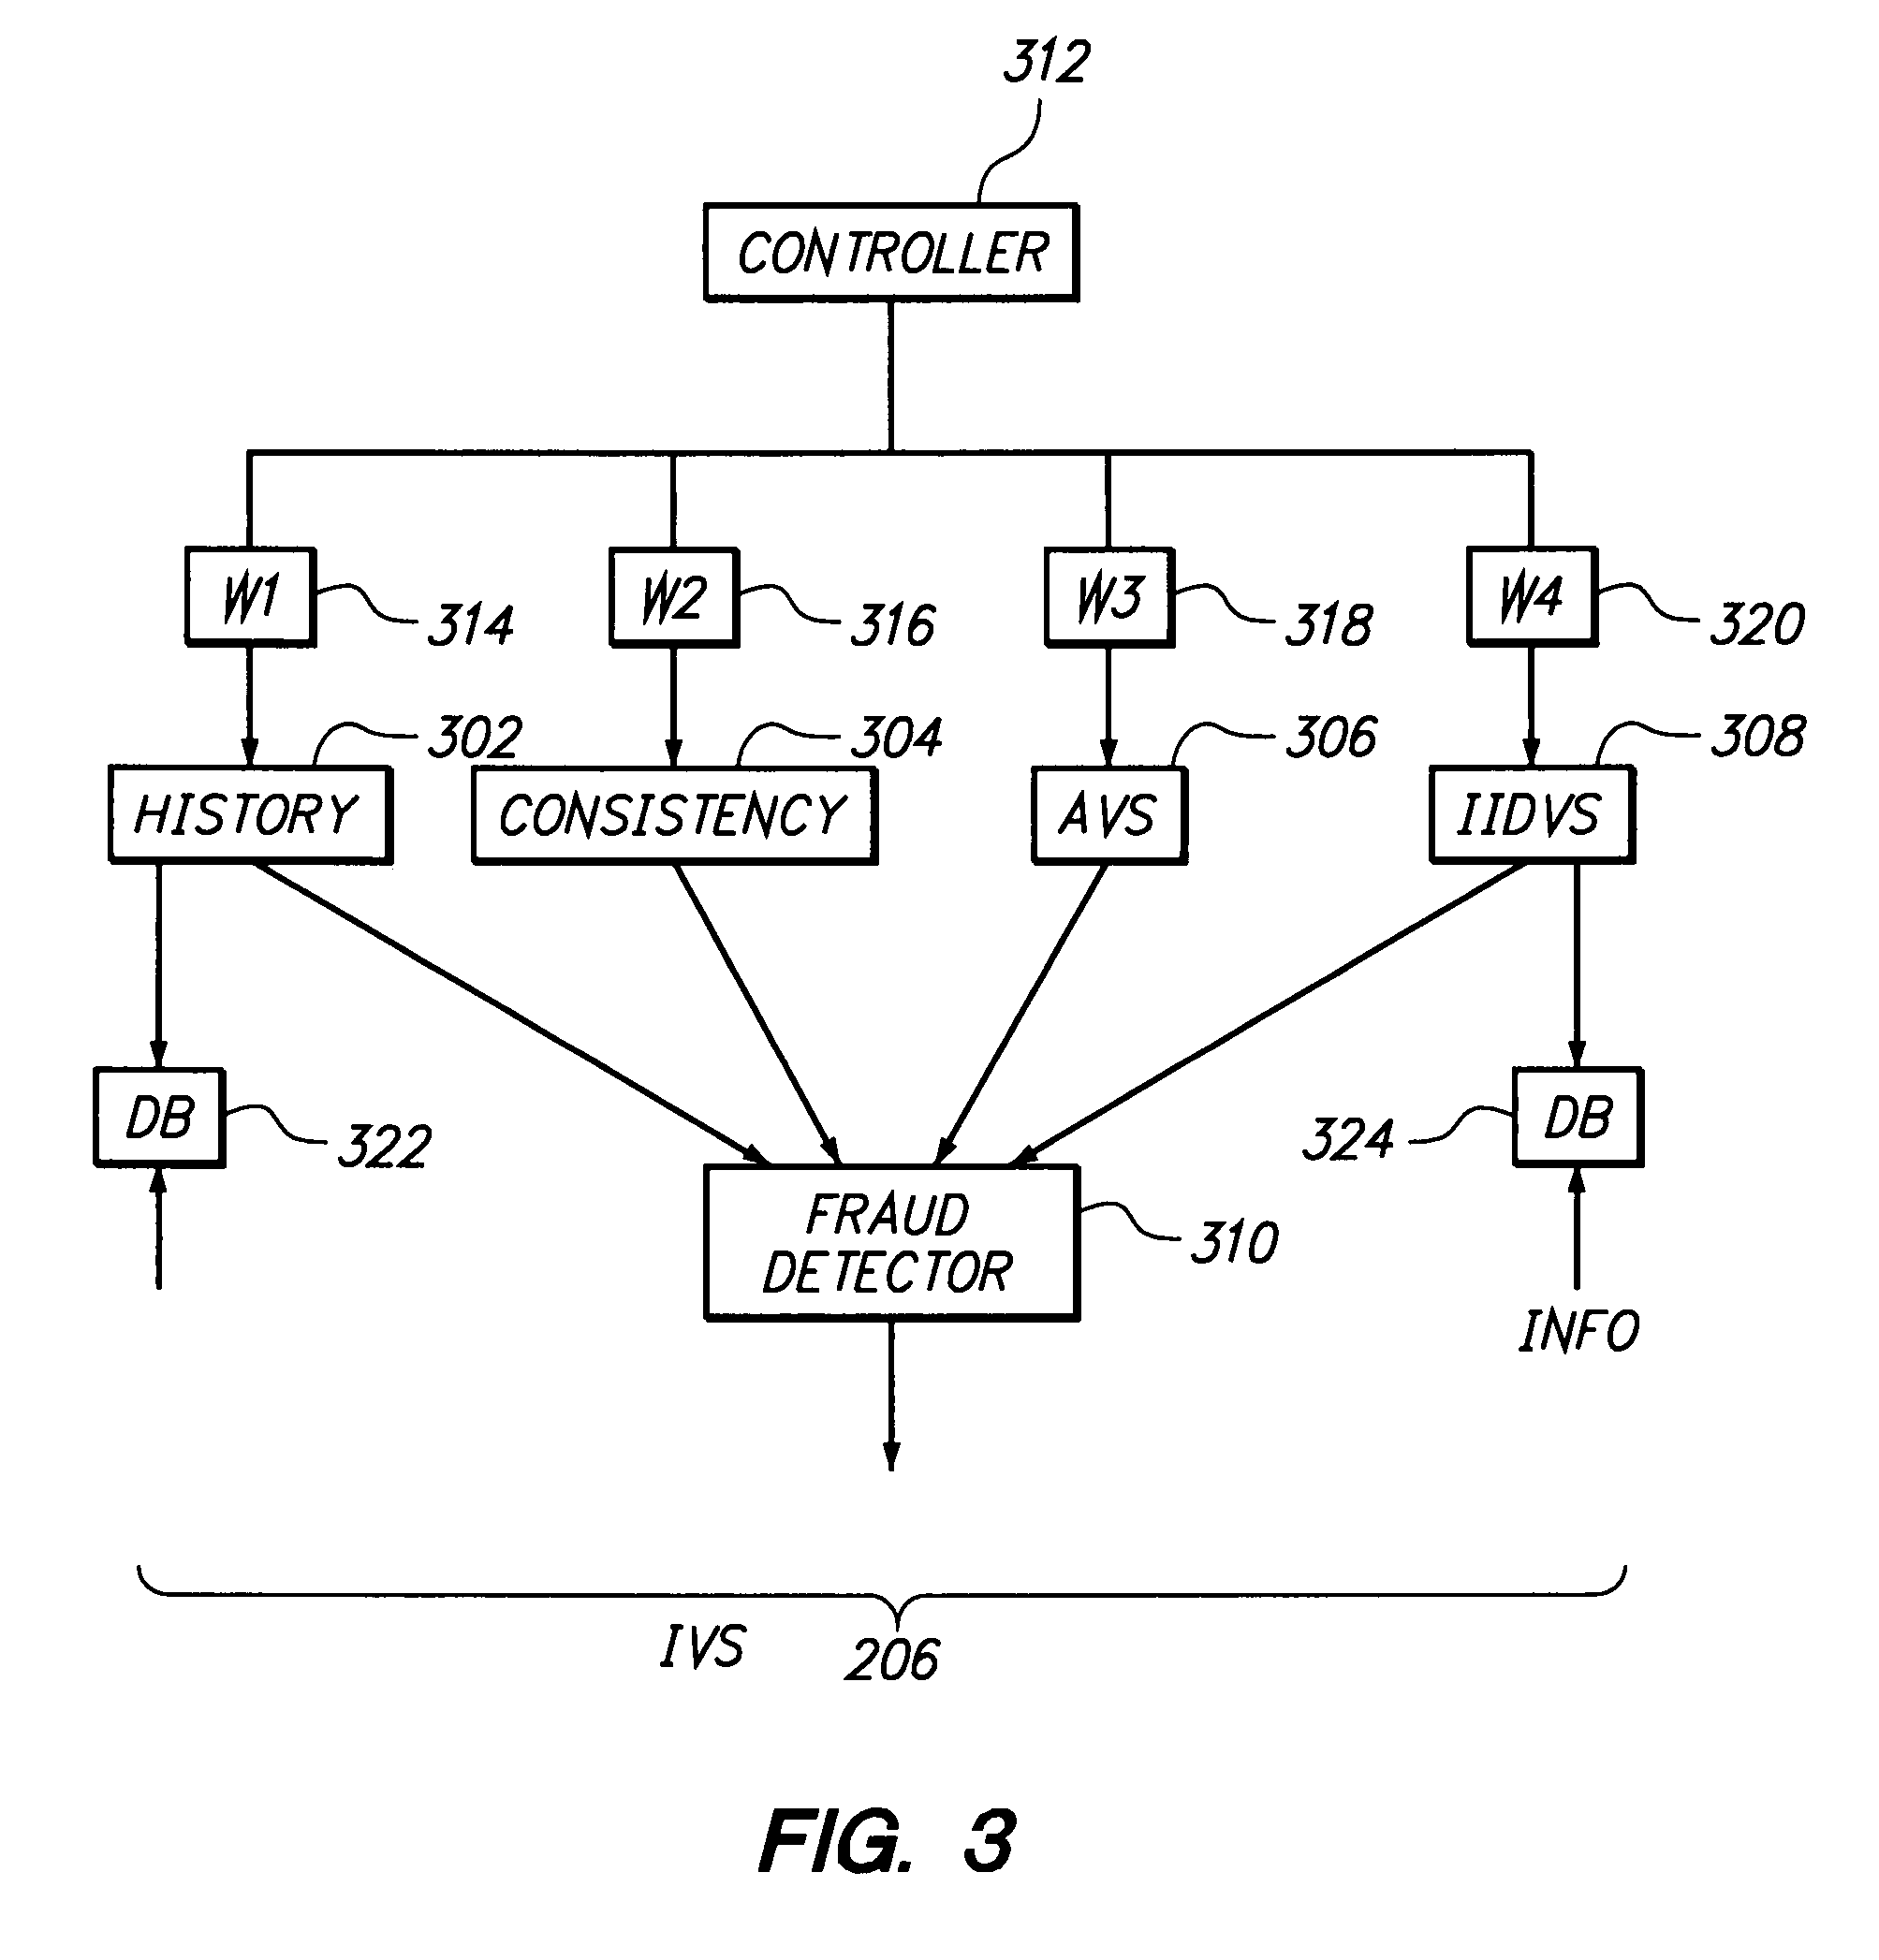 Method and apparatus for evaluating fraud risk in an electronic commerce transaction